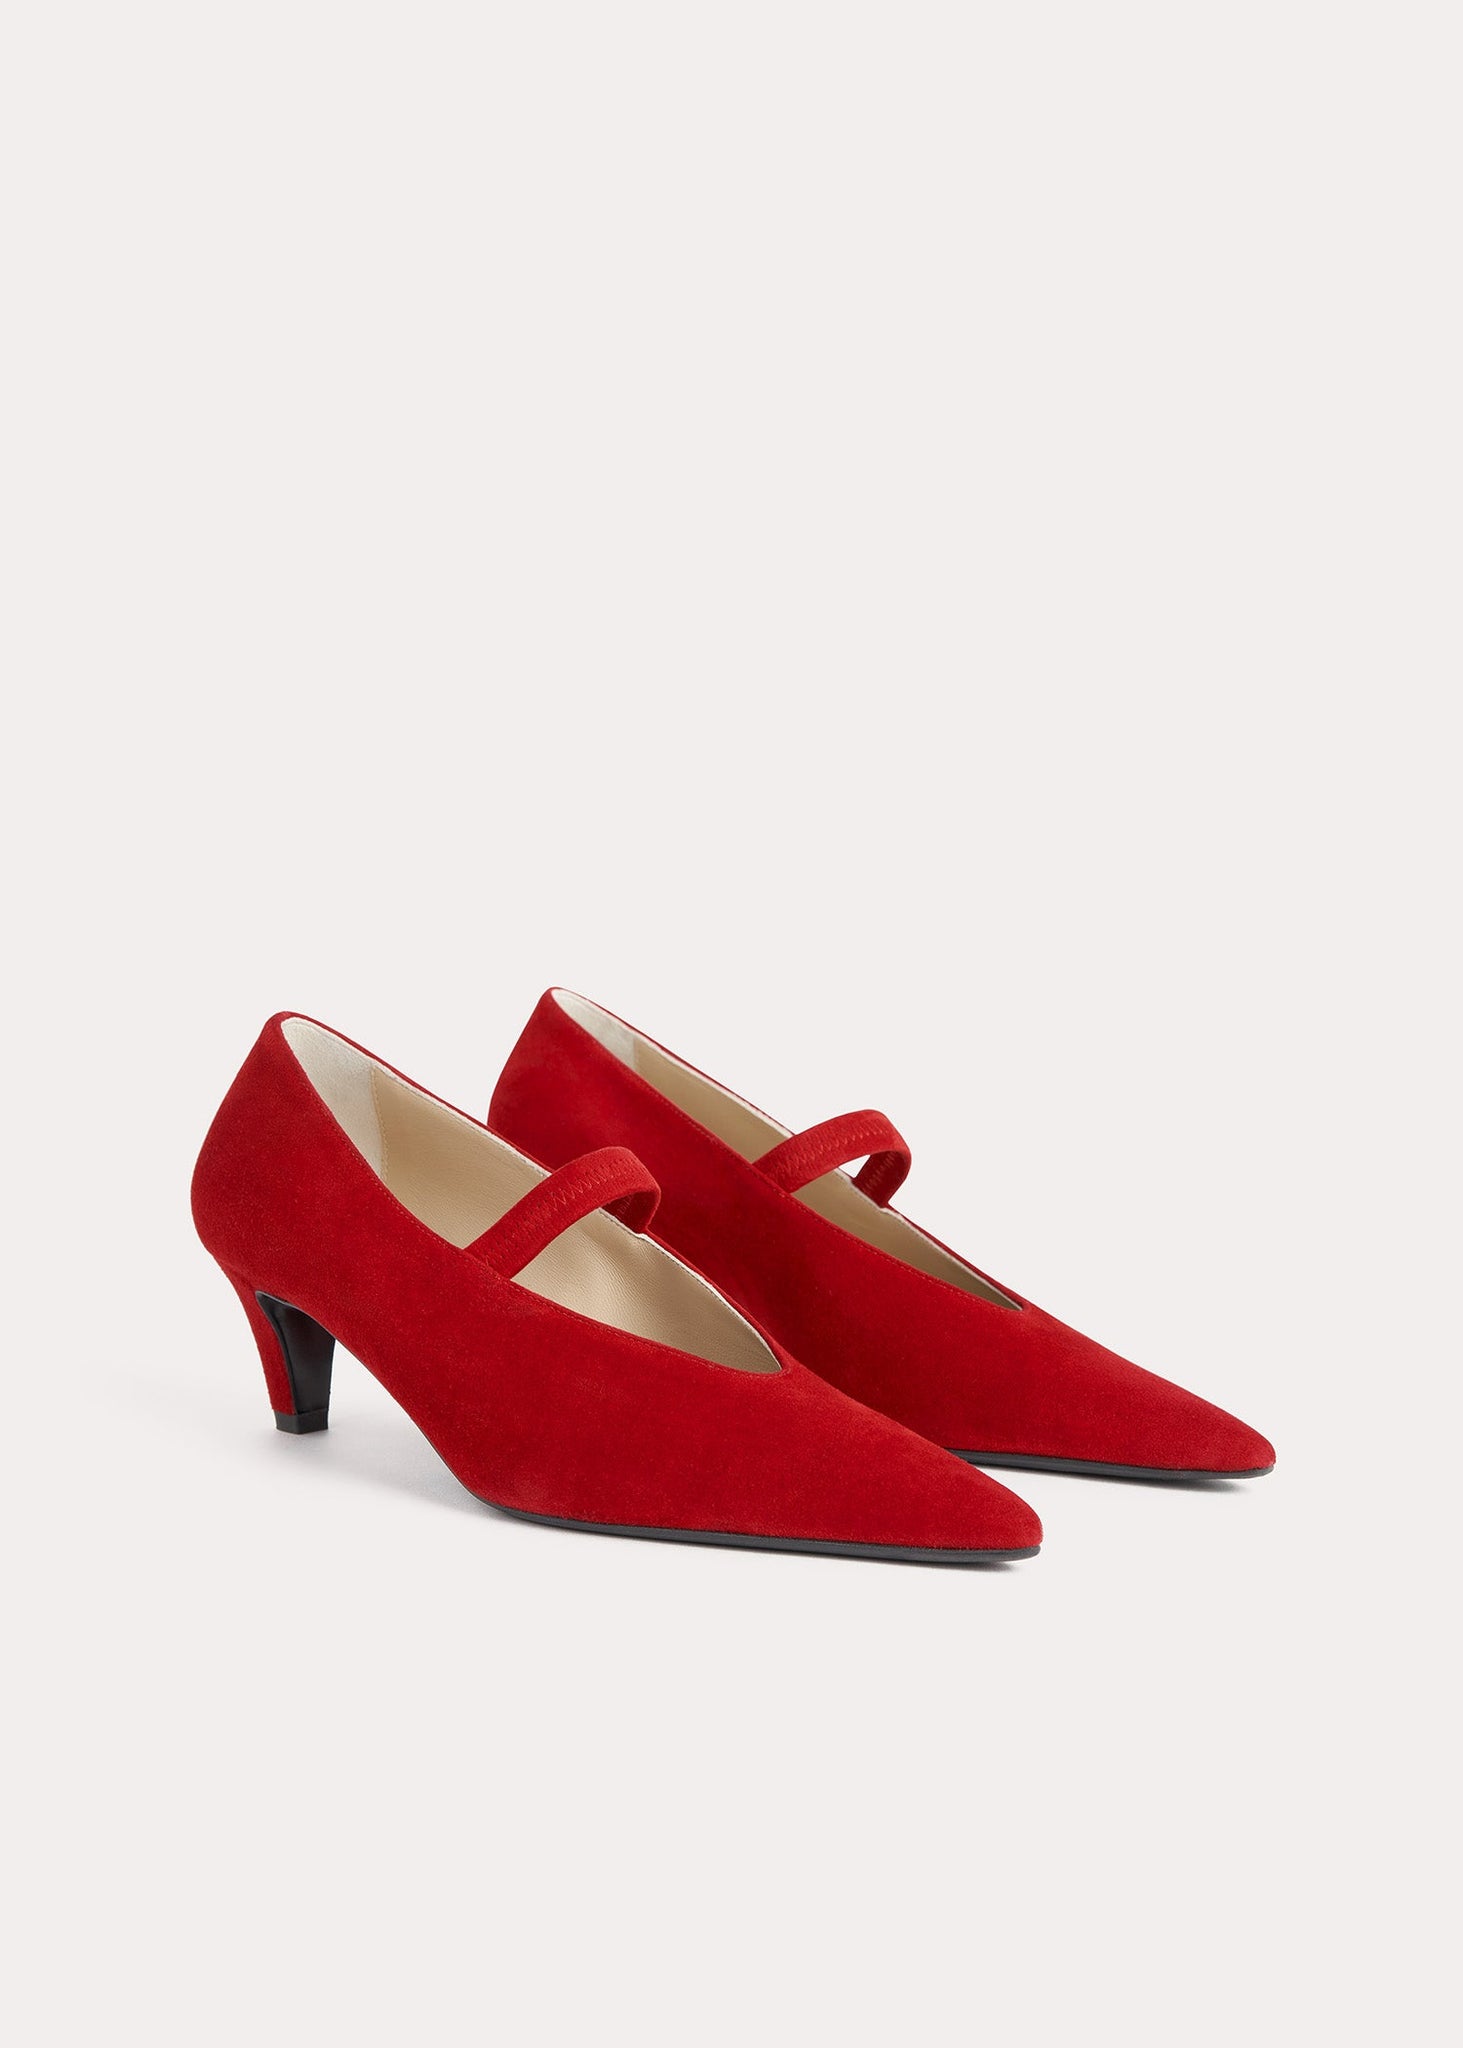 The Mary Jane Pump scarlet